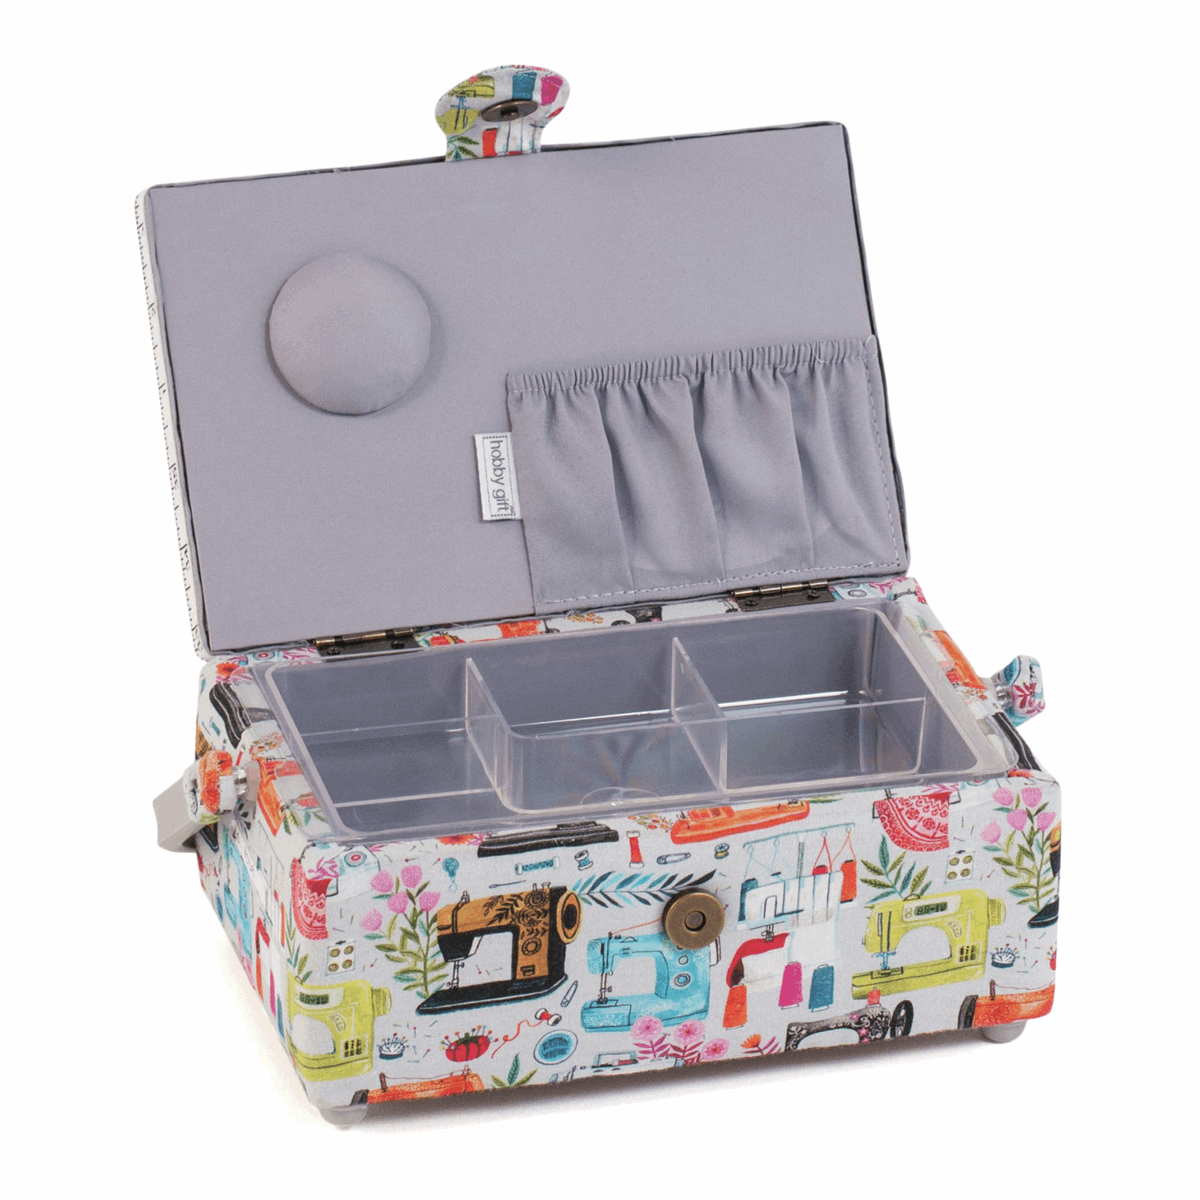 Sewing Machines Rectangle Sewing Box - Small